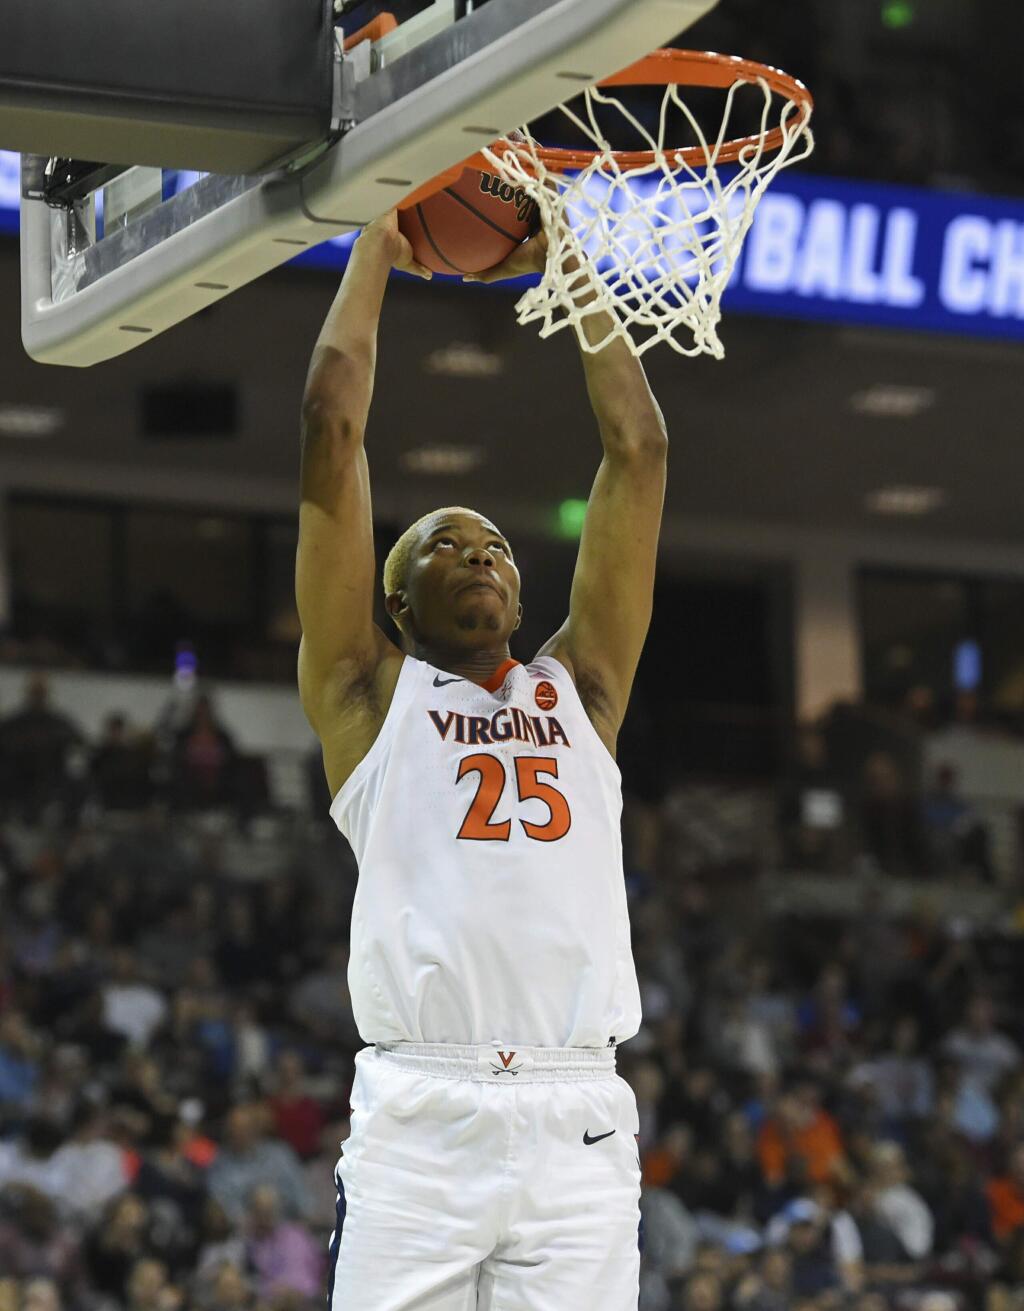 Virginia's Mamadi Diakite makes a dunk against Gardner-Webb during a first-round game in the NCAA Tournament in Columbia, S.C., Friday, March 22, 2019. (AP Photo/Richard Shiro)